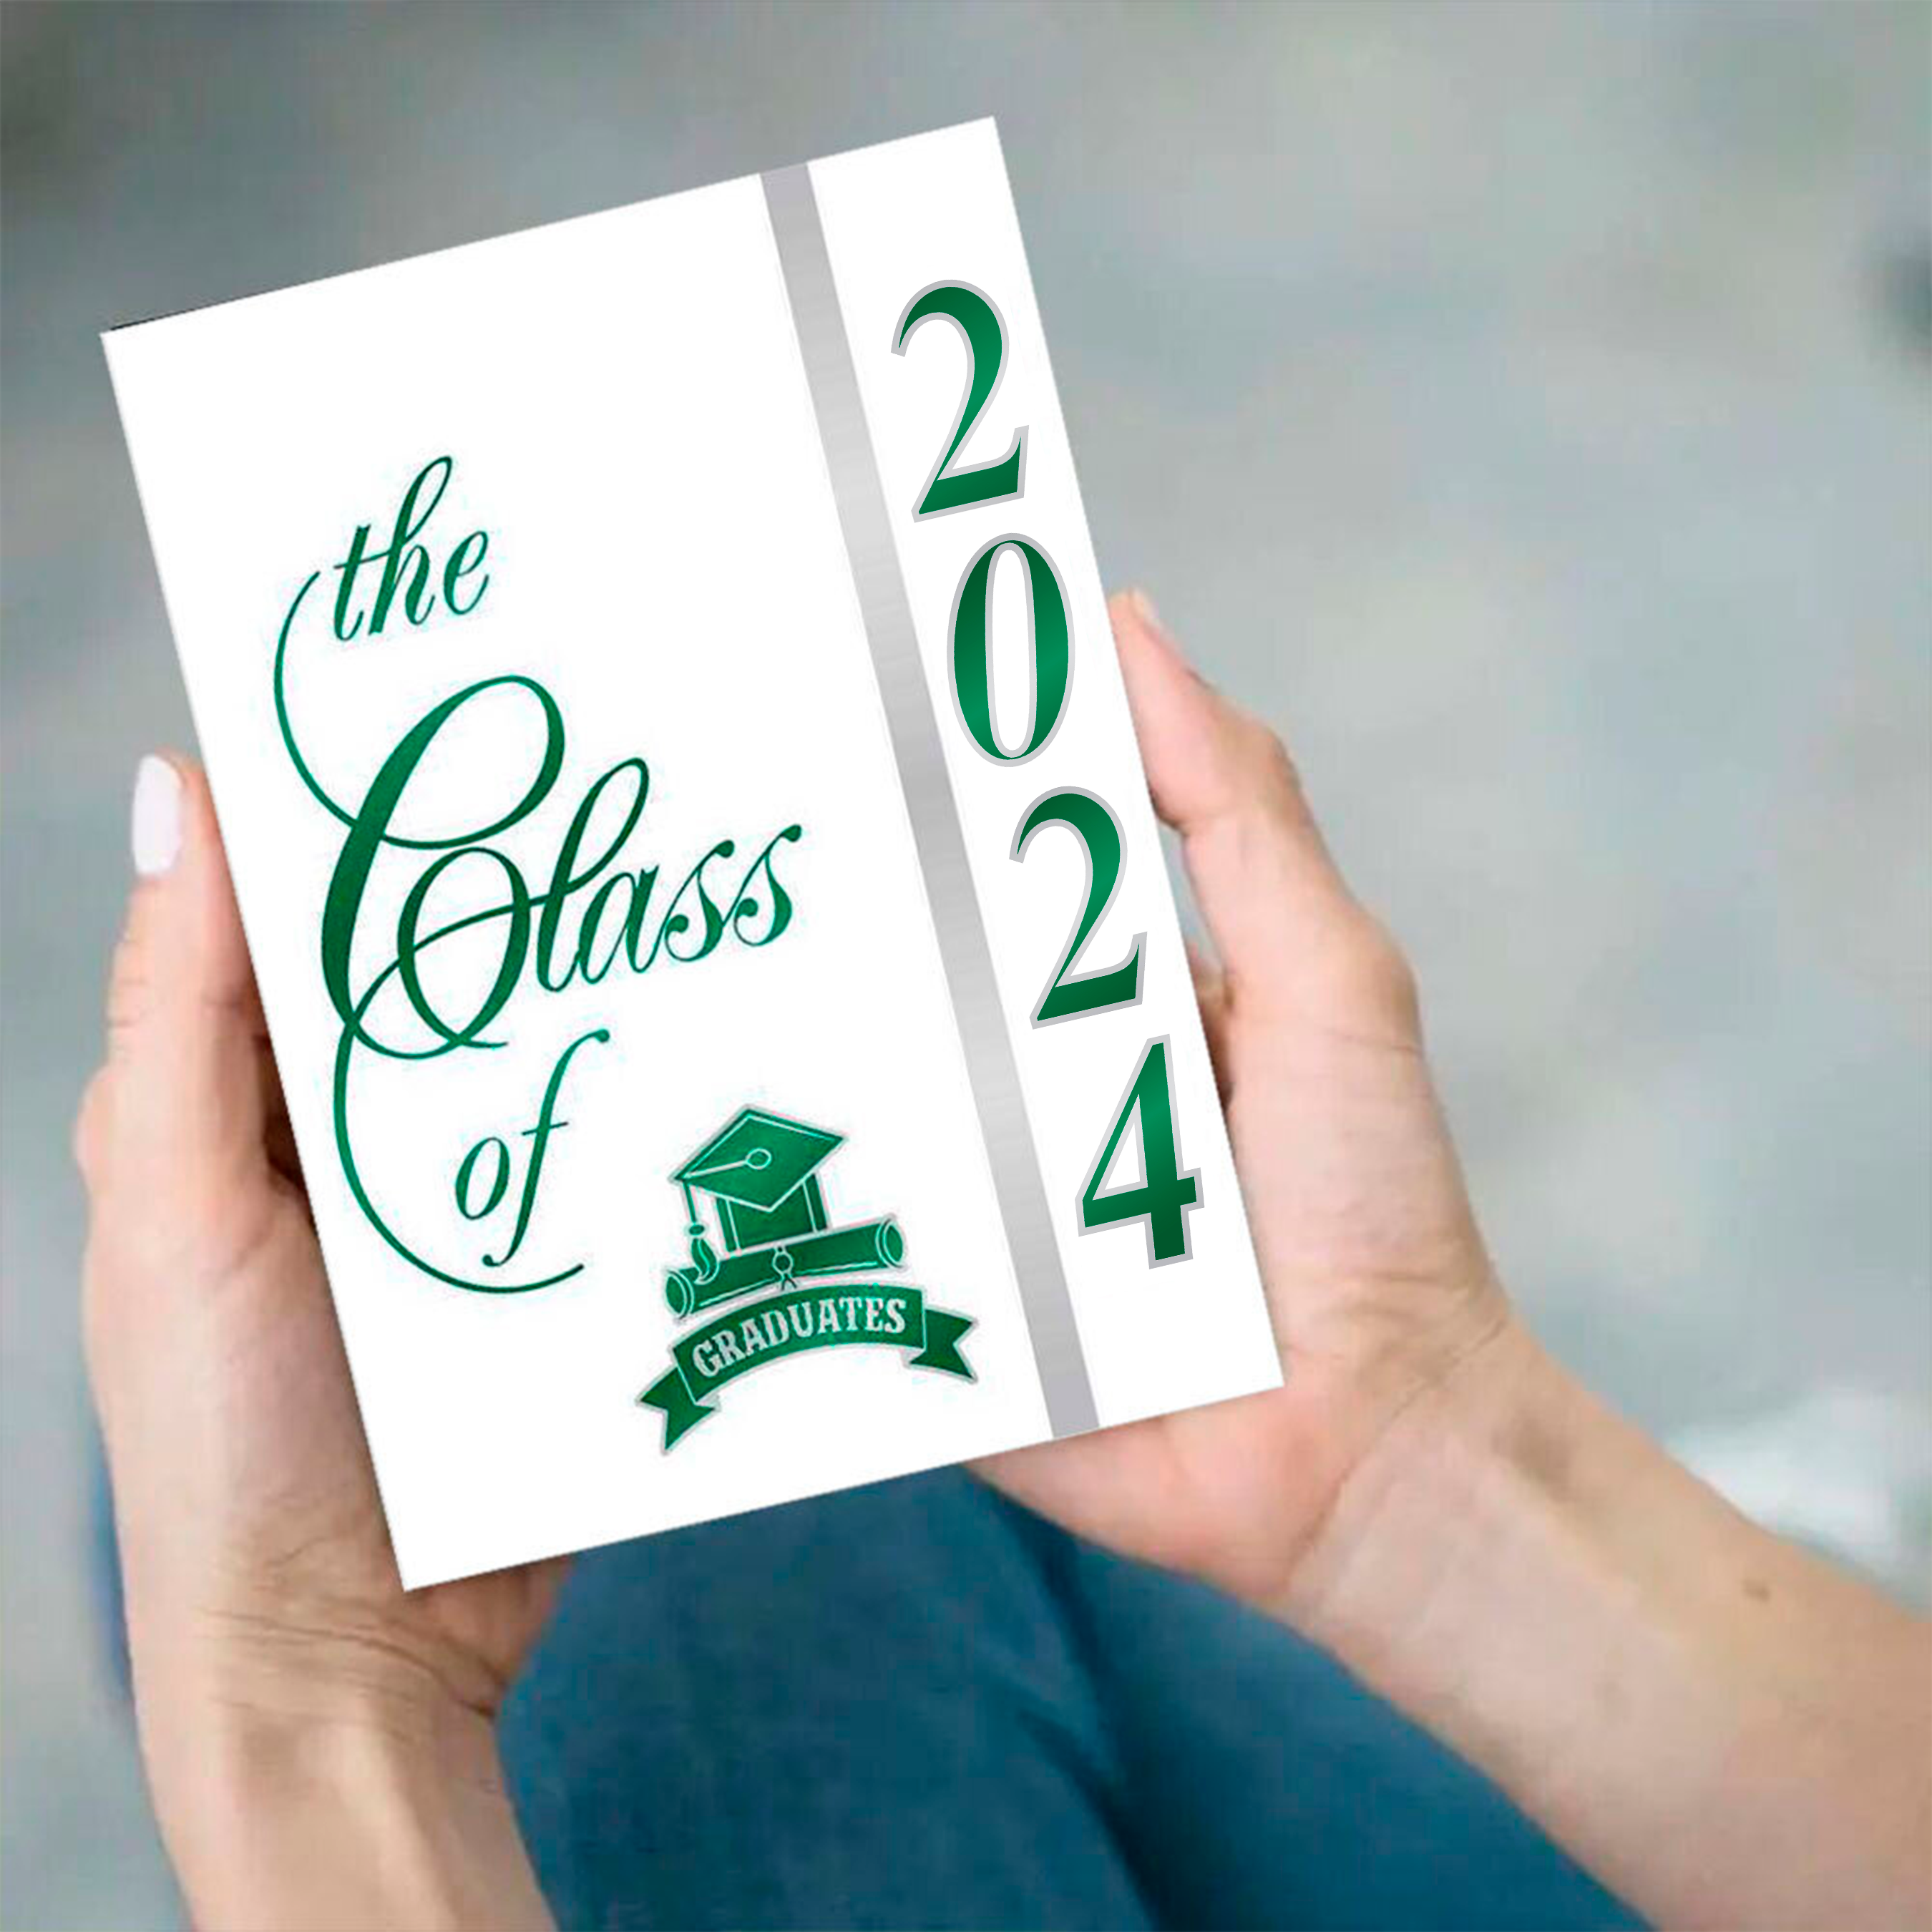 Hands holding a Class of 2021 graduation announcement with green foil.